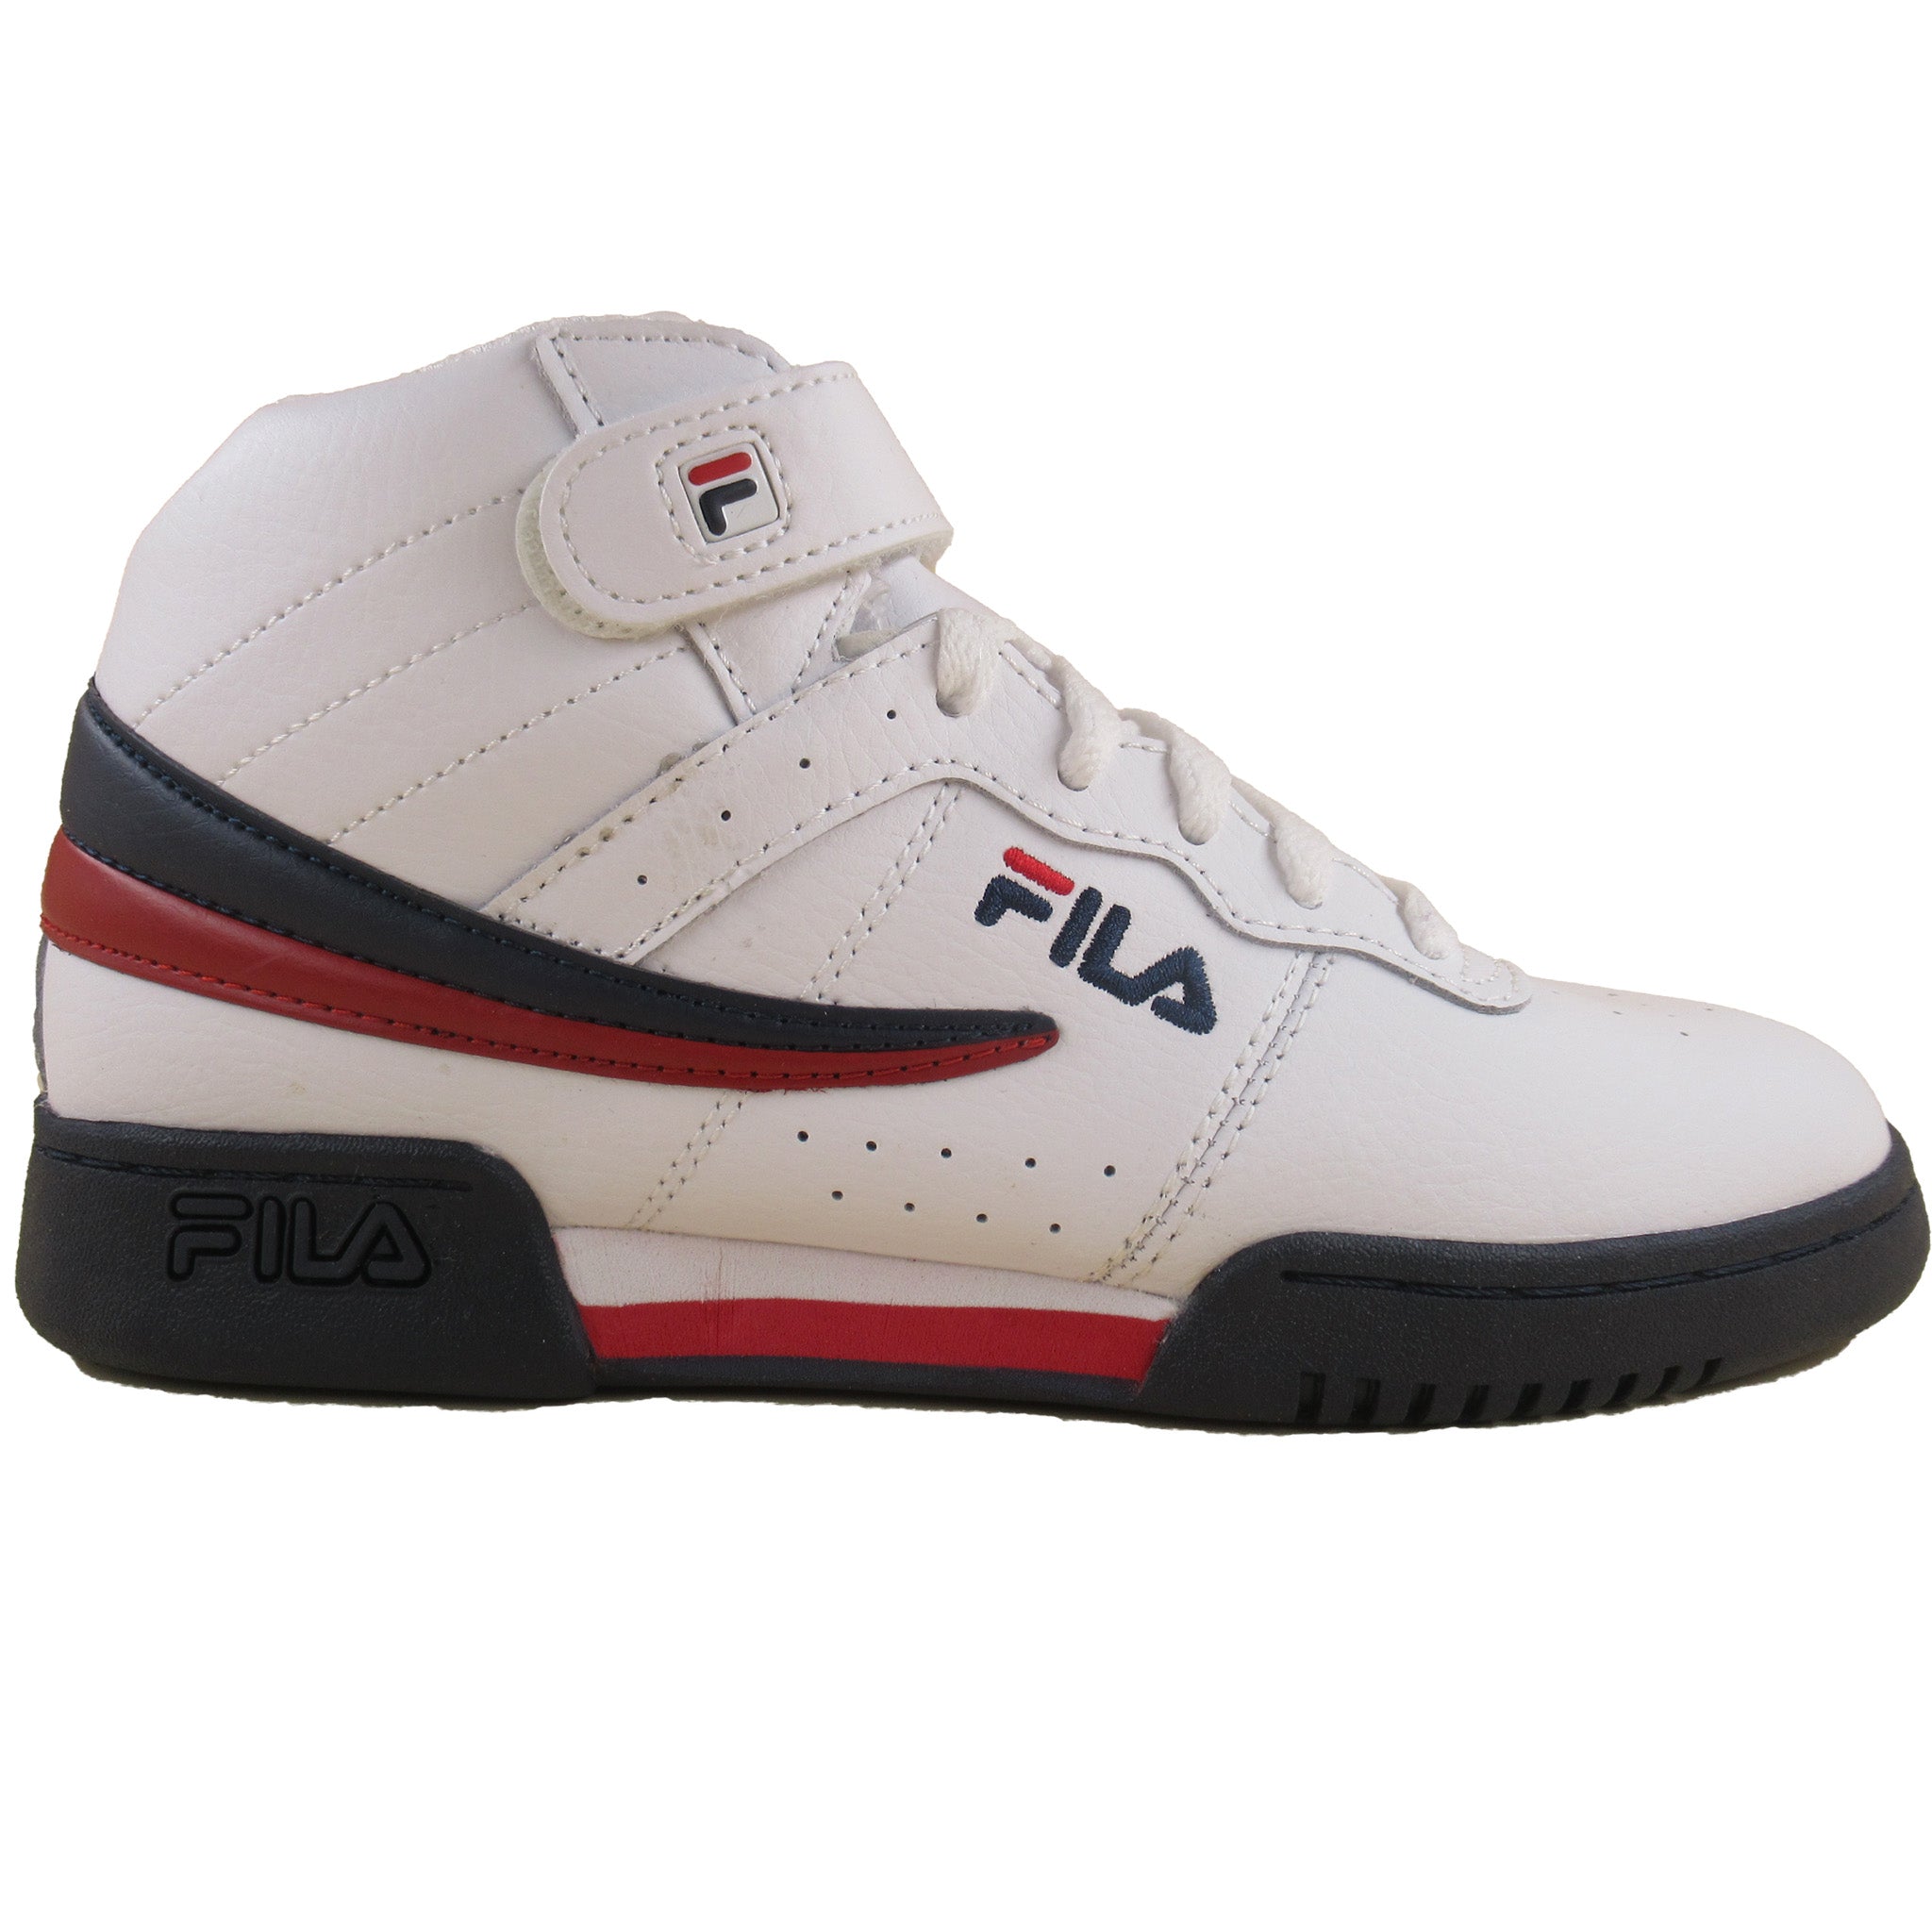 Fila Kids That More White Navy Red Store Shoe Shoes and Casual – Grade-School Athletic F-13